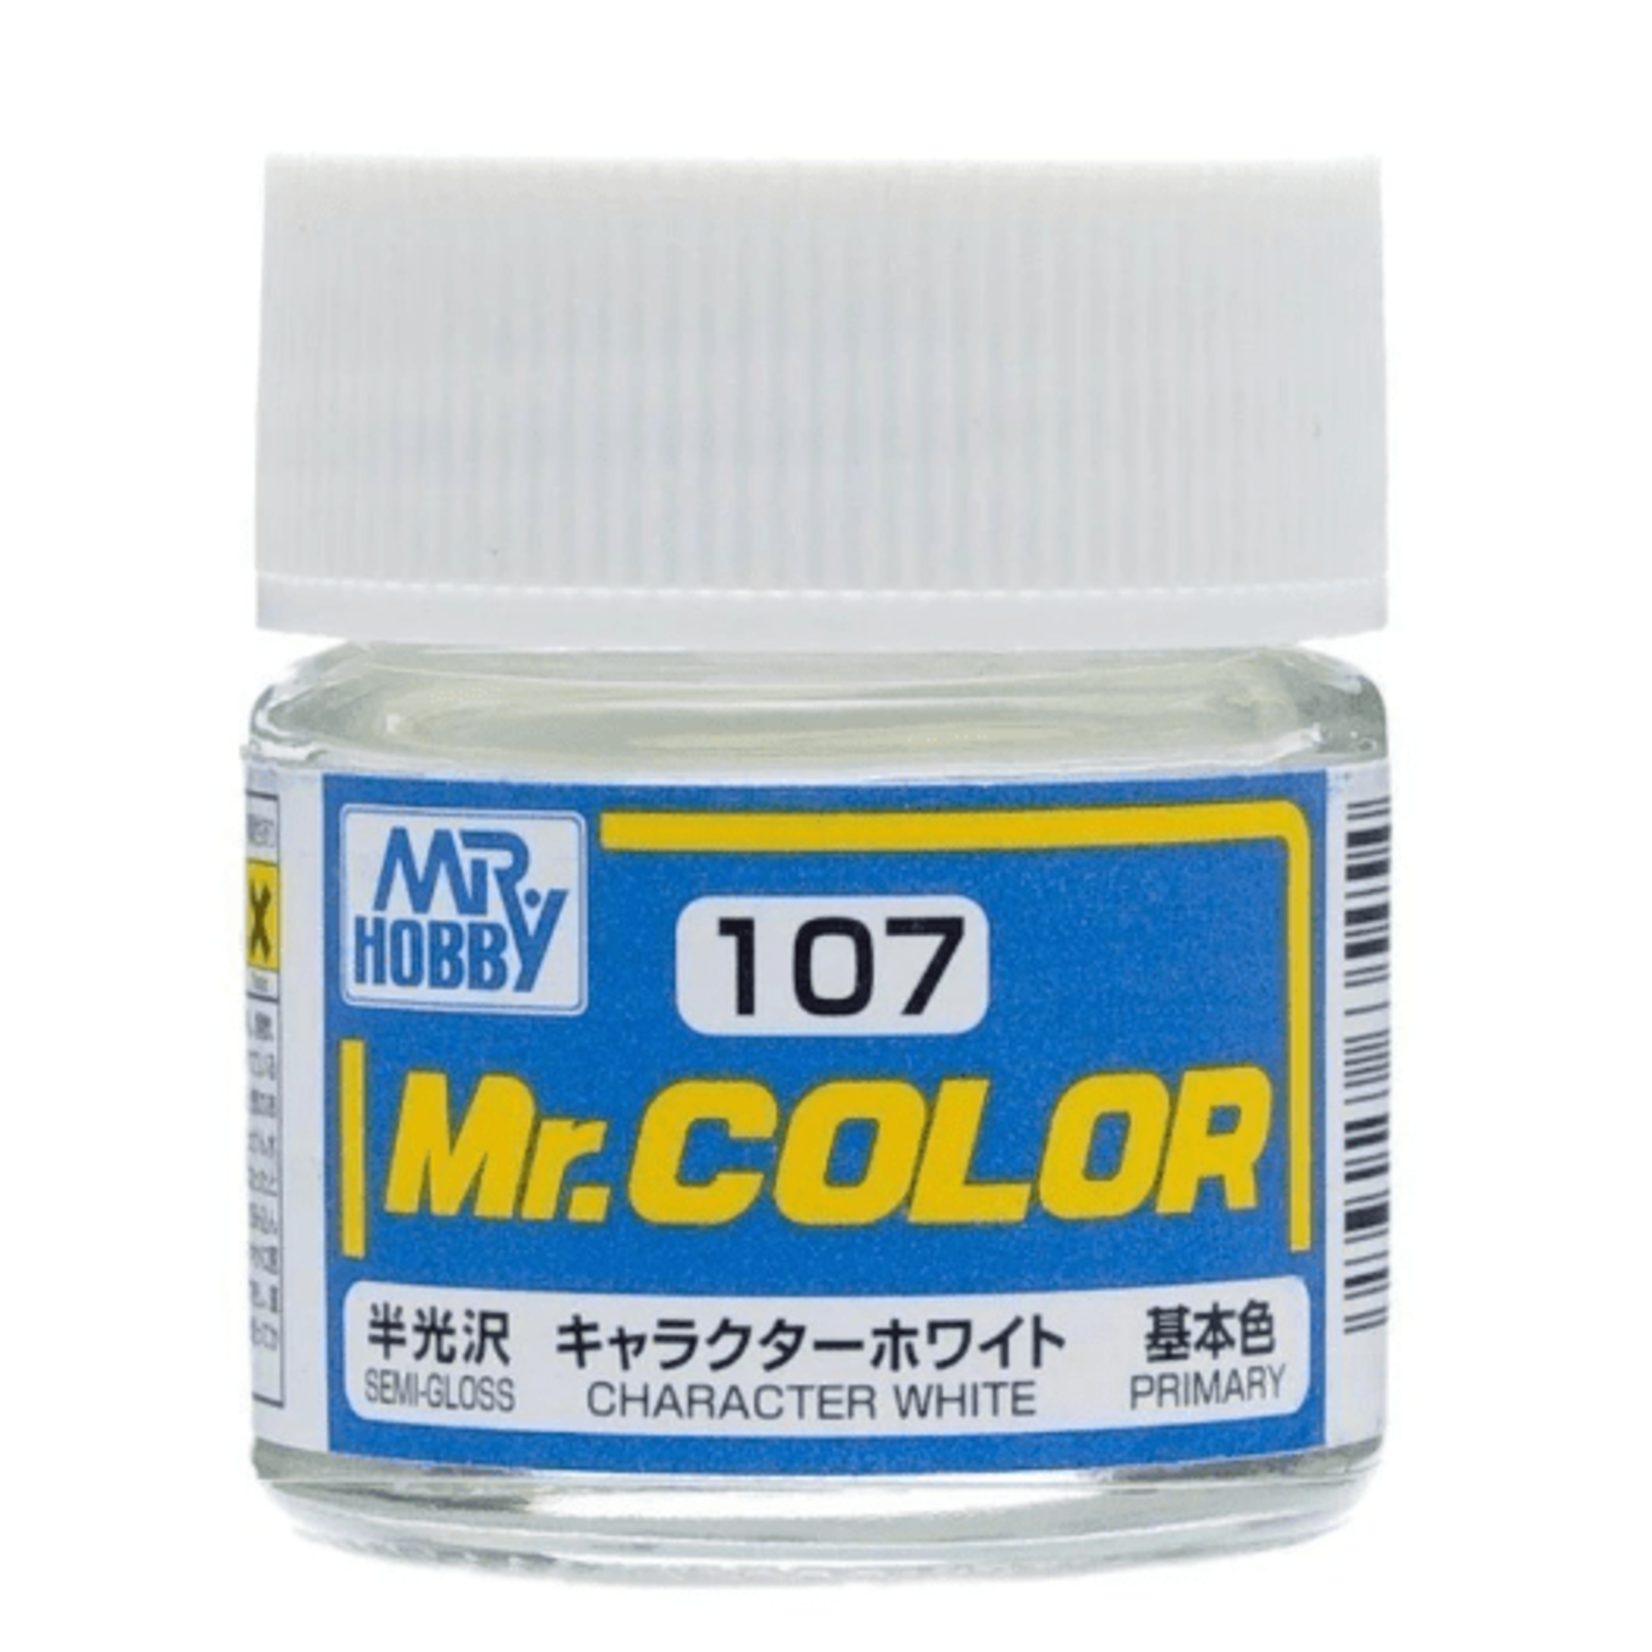 GSI Creos GNZ-C107 Mr Hobby C107 Semi Gloss Character White - Lacquer - 10ml